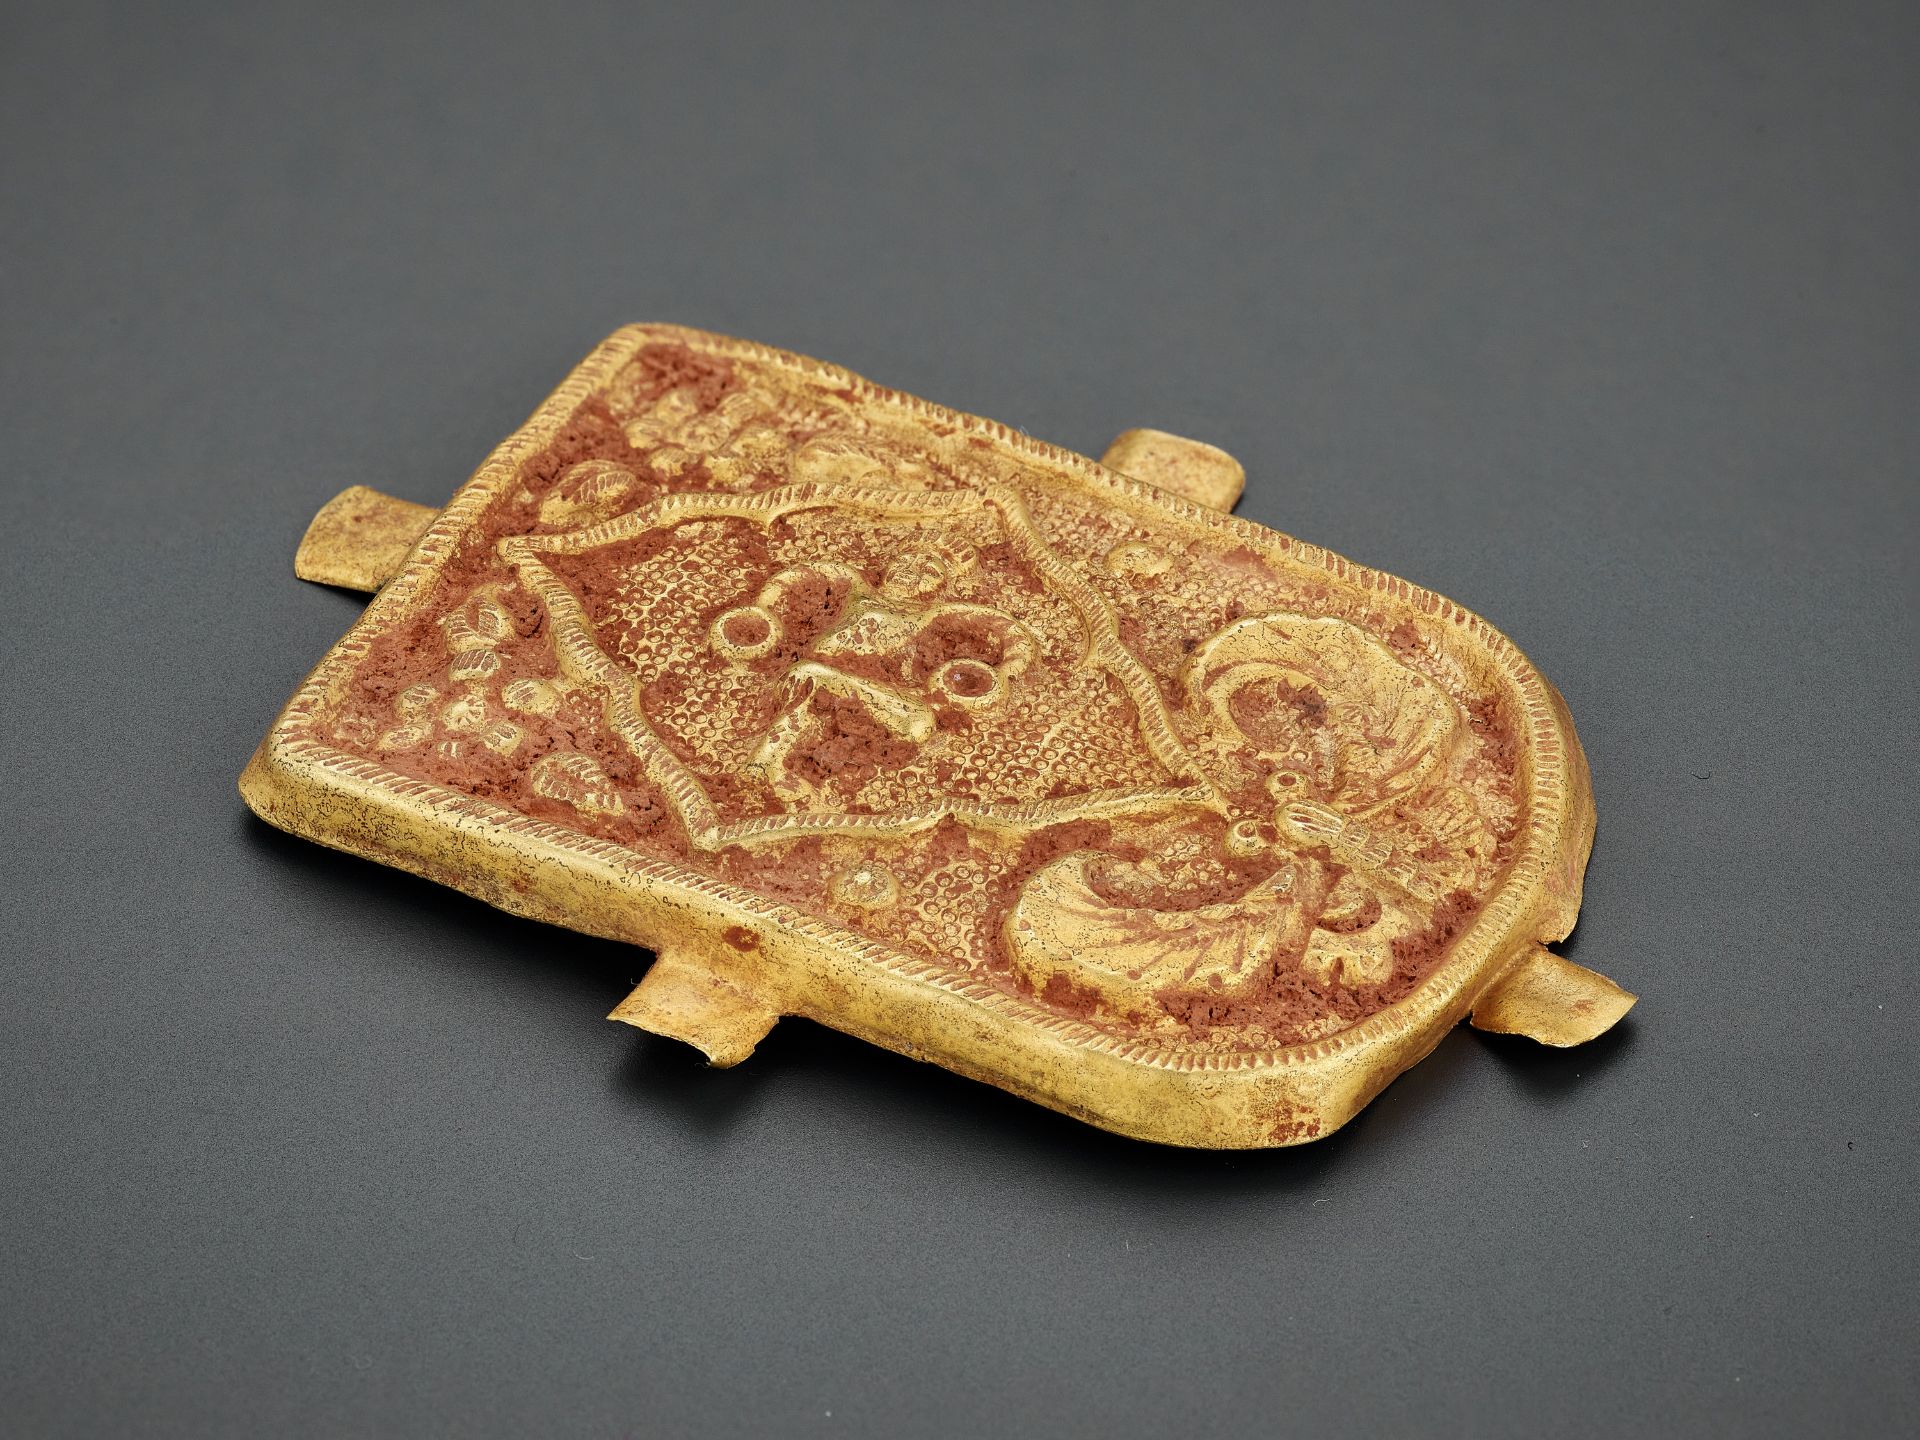 A 13-PART GOLD REPOUSSE BELT, TANG TO LIAO DYNASTY - Image 5 of 7